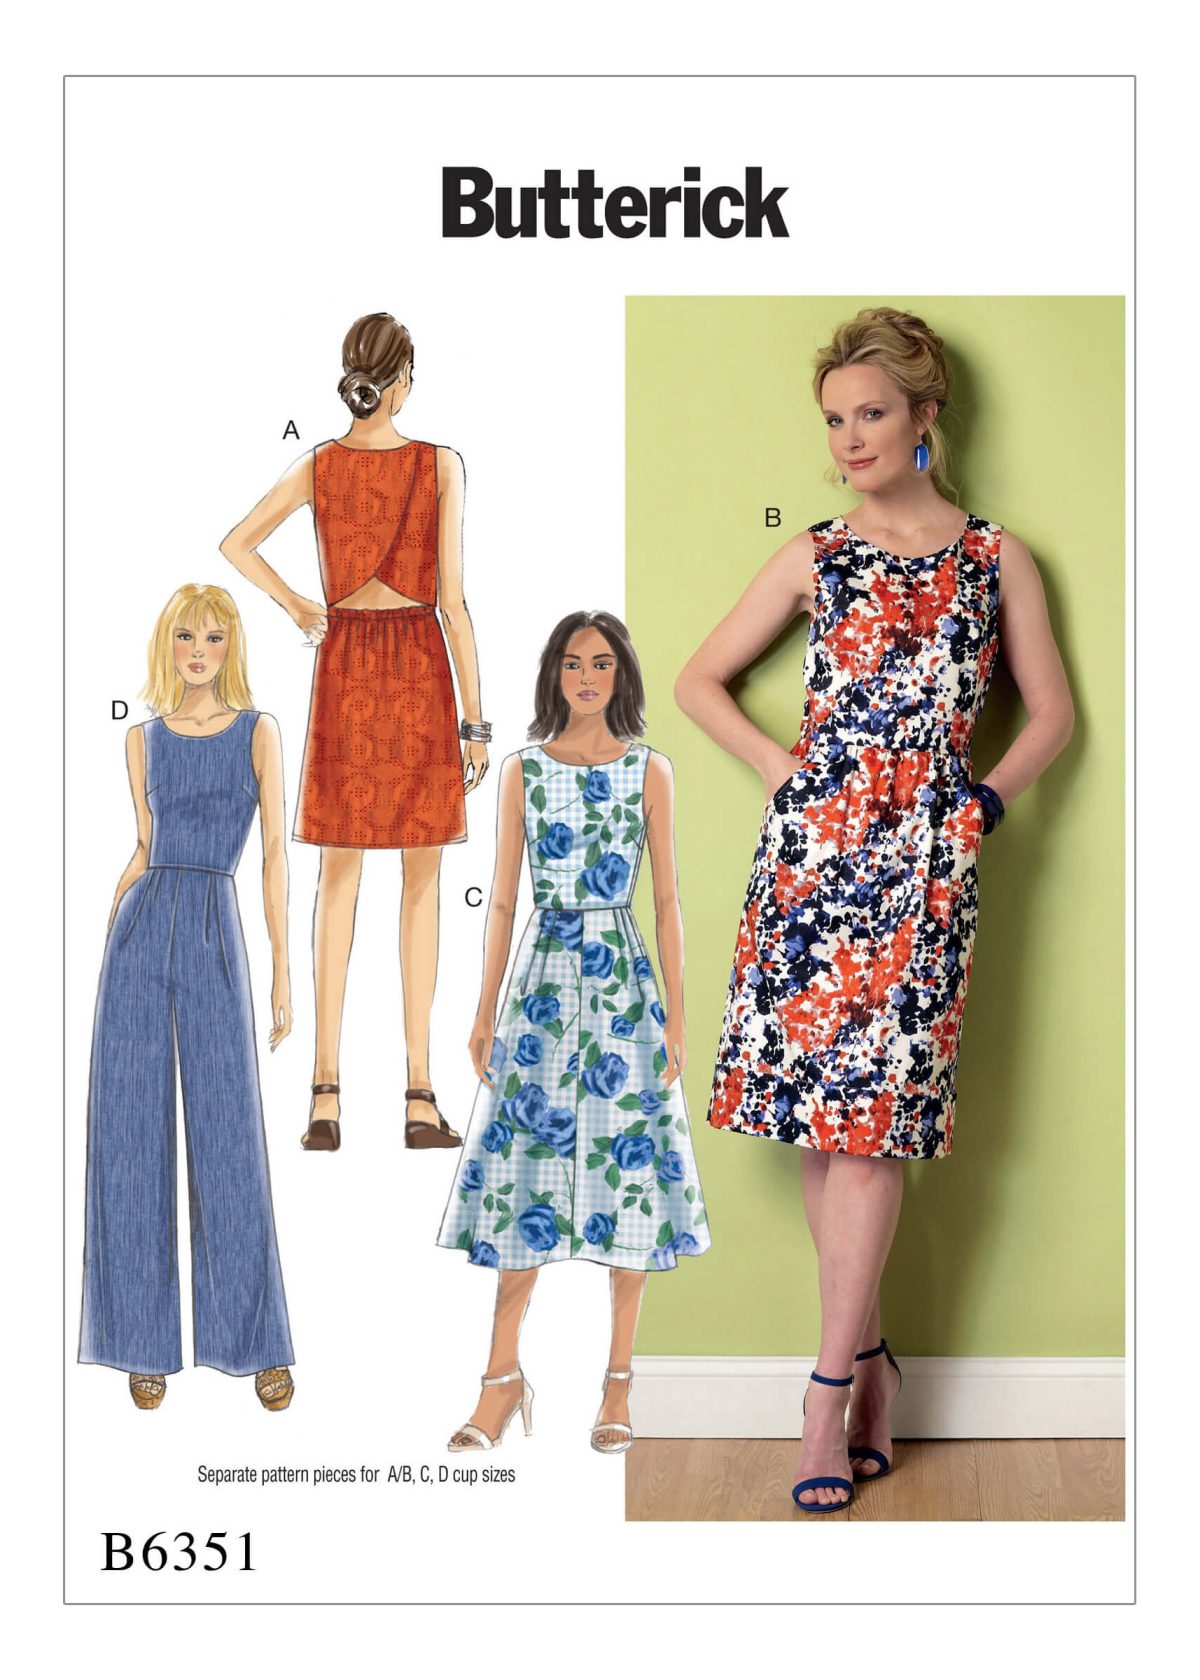 Butterick Sewing Pattern B6351 Misses' Open-Back, Tulip-Detail Dresses and Jumpsuit